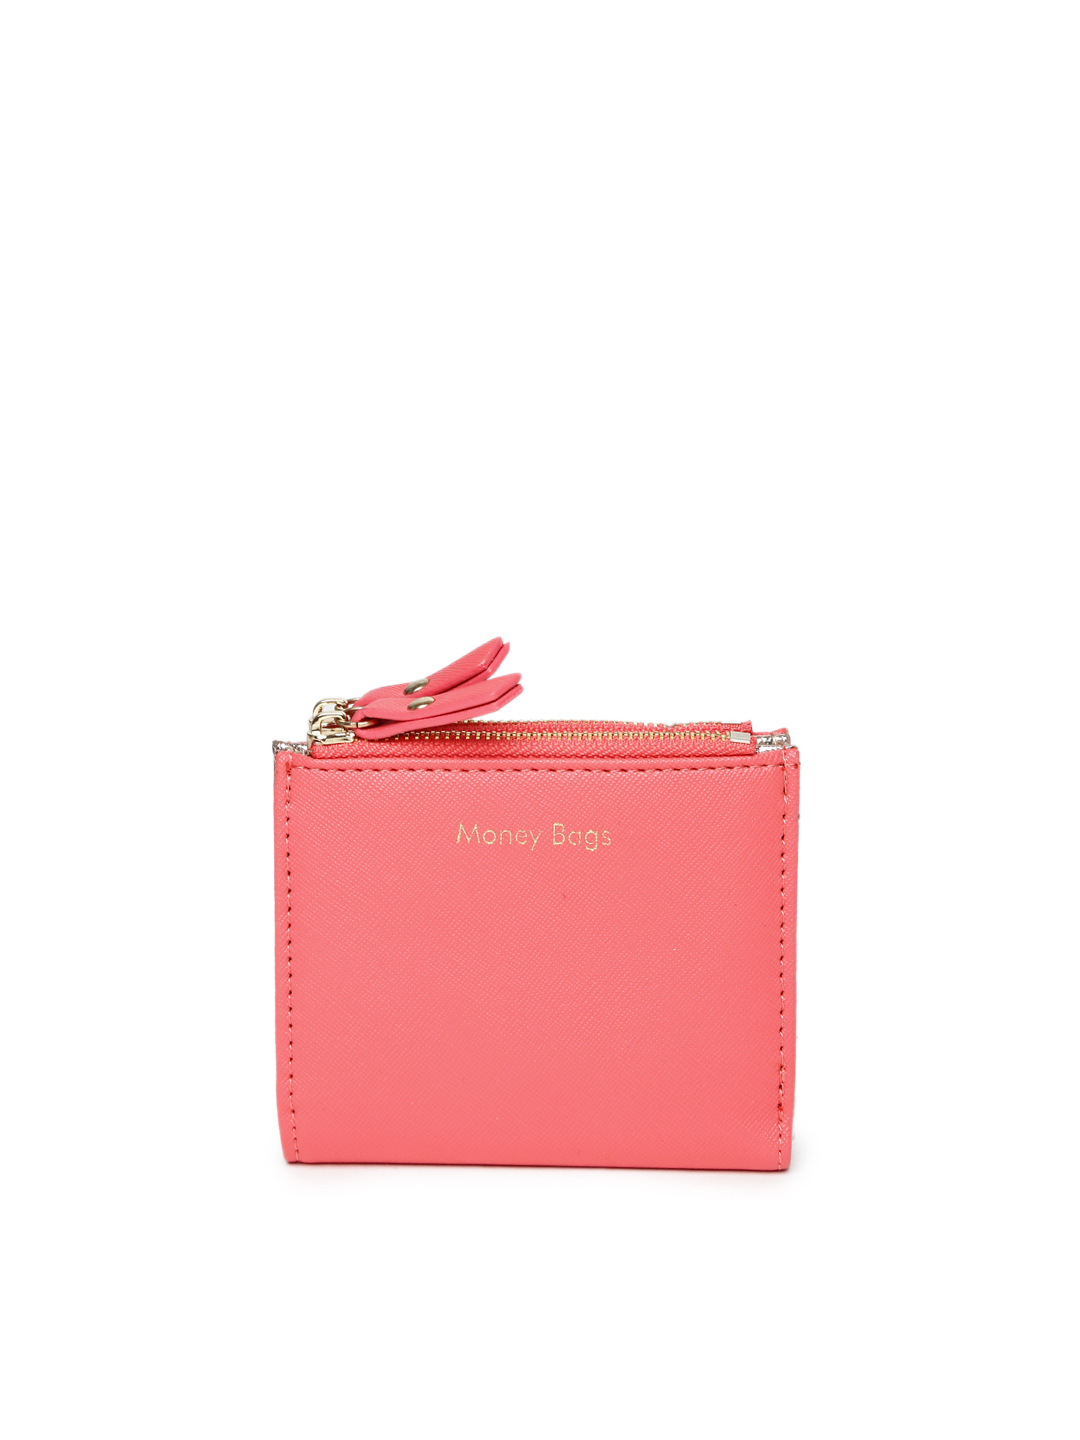 Accessorize Women Coral Pink Wallet